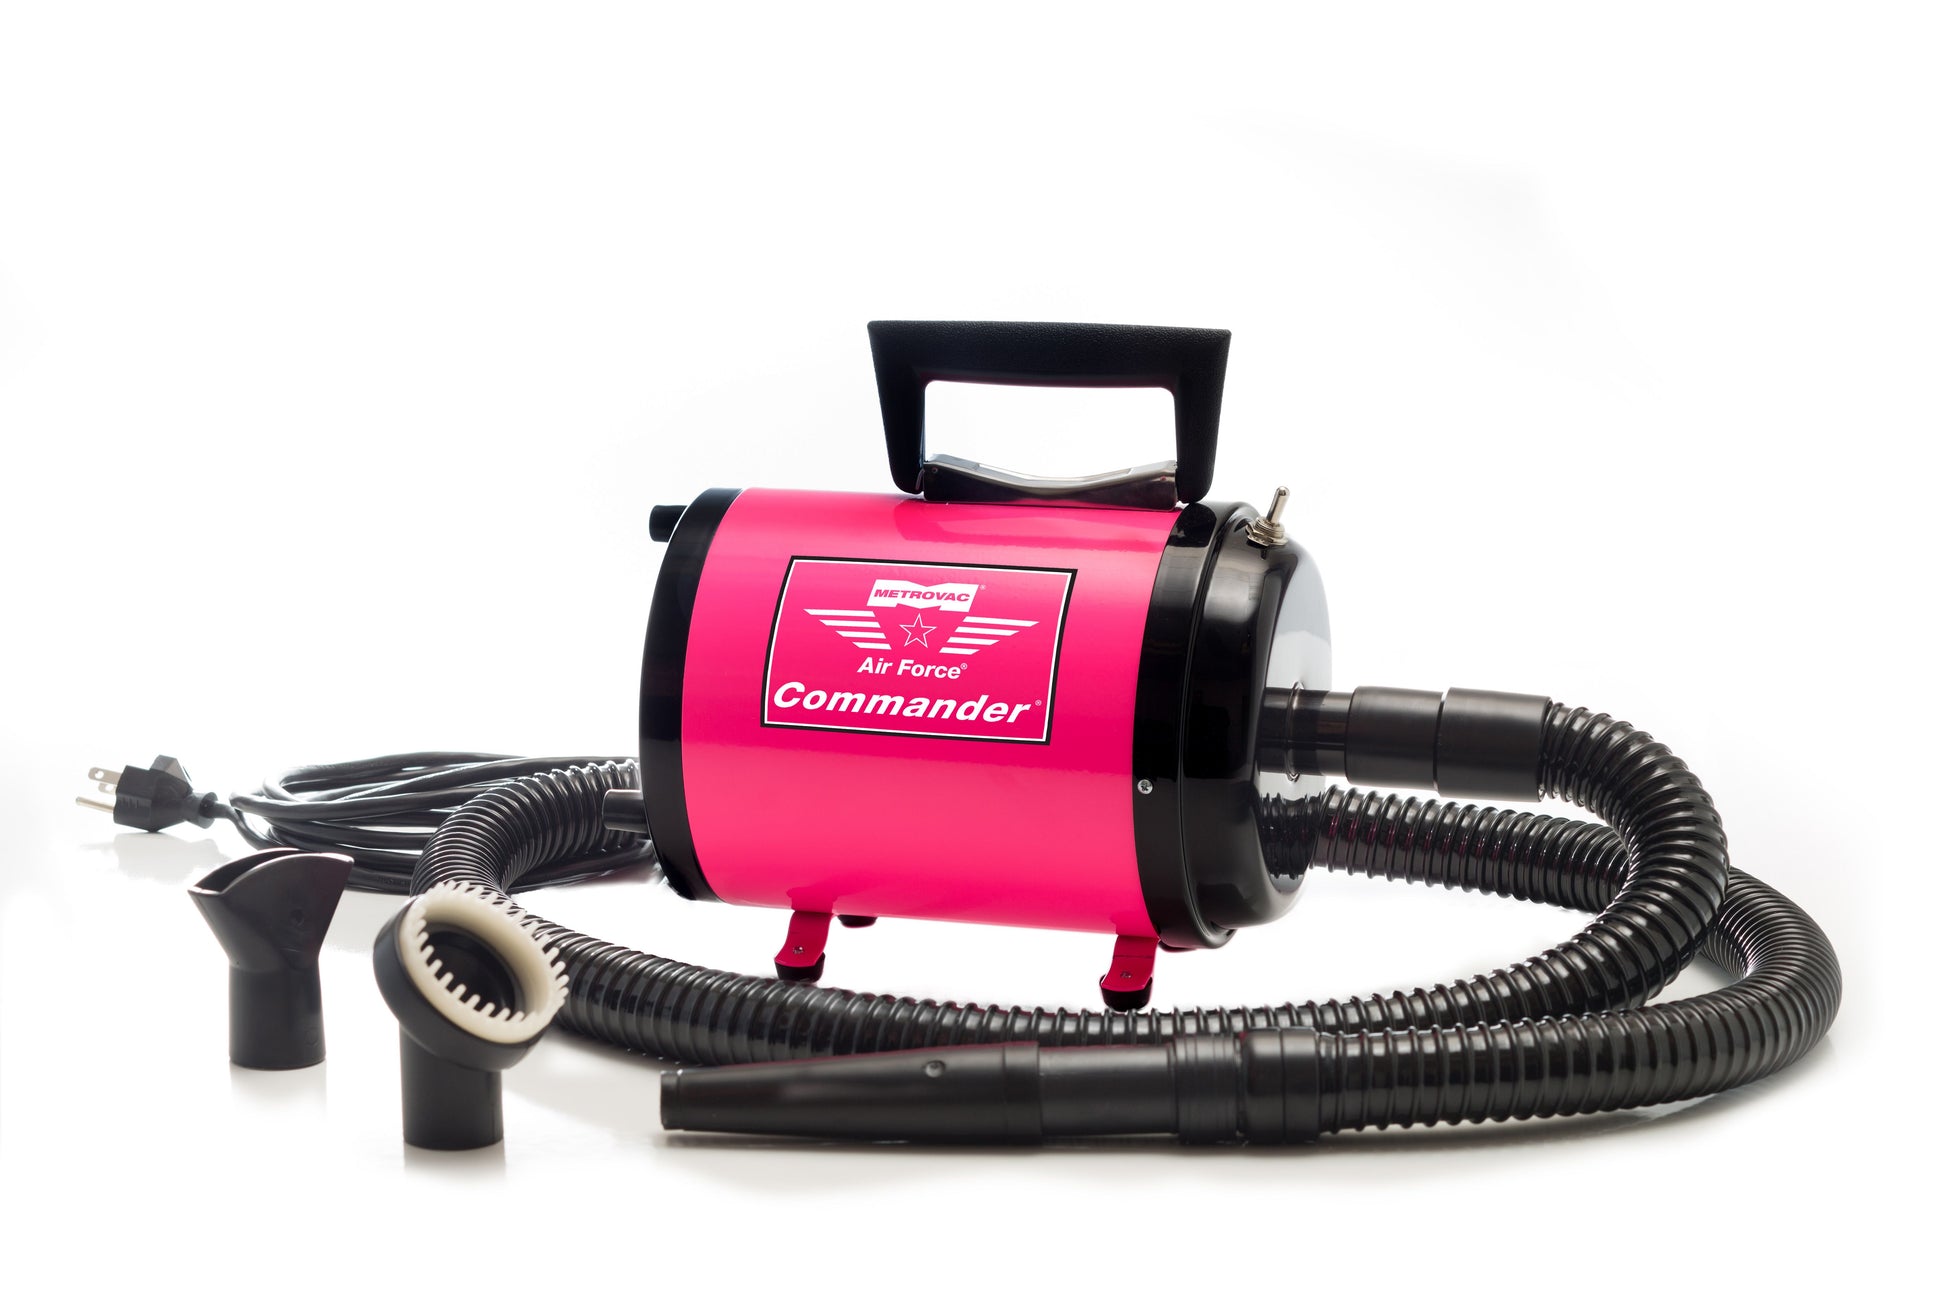 The Air Force® Commander® 2-Speed Professional Pet Dryer by Metrovac is designed to push water of cats and dog. This pet dryer is compact with two speeds, allowing for different coat conditions and different sizes of breeds. It helps detangle mats, shed coat, and makes it possible to examine the skin more closely. Pink